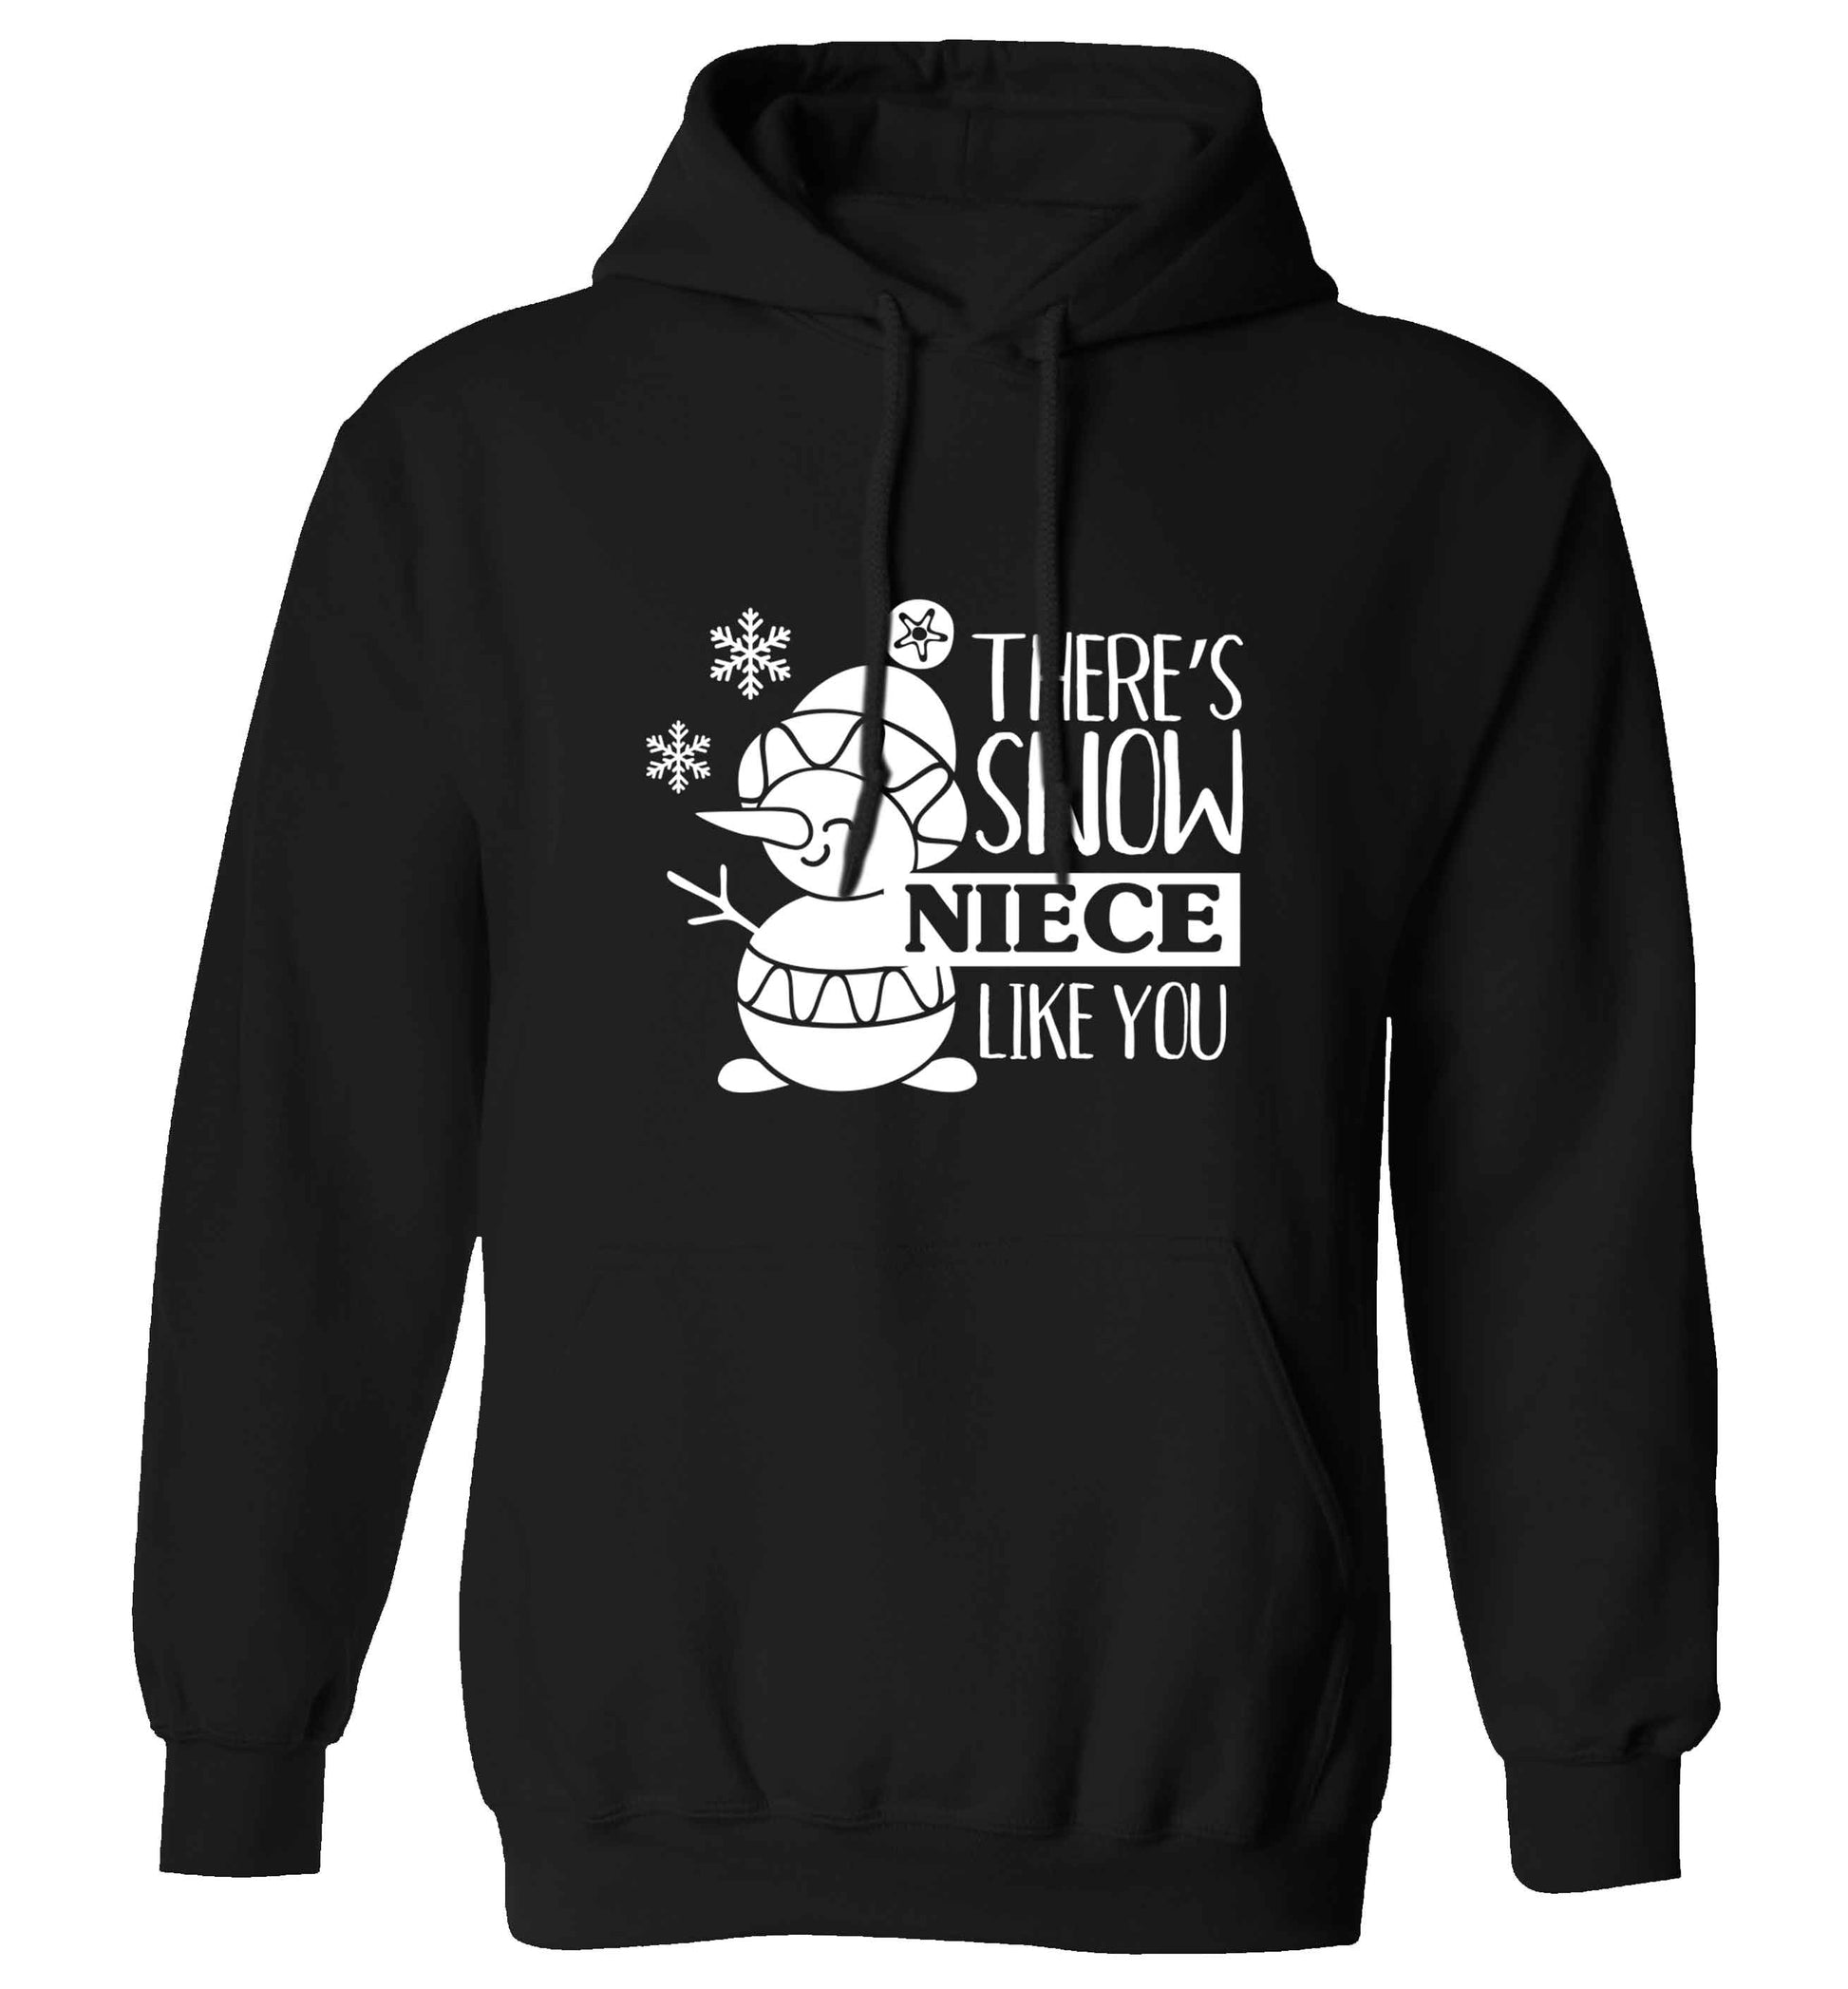 There's snow niece like you adults unisex black hoodie 2XL